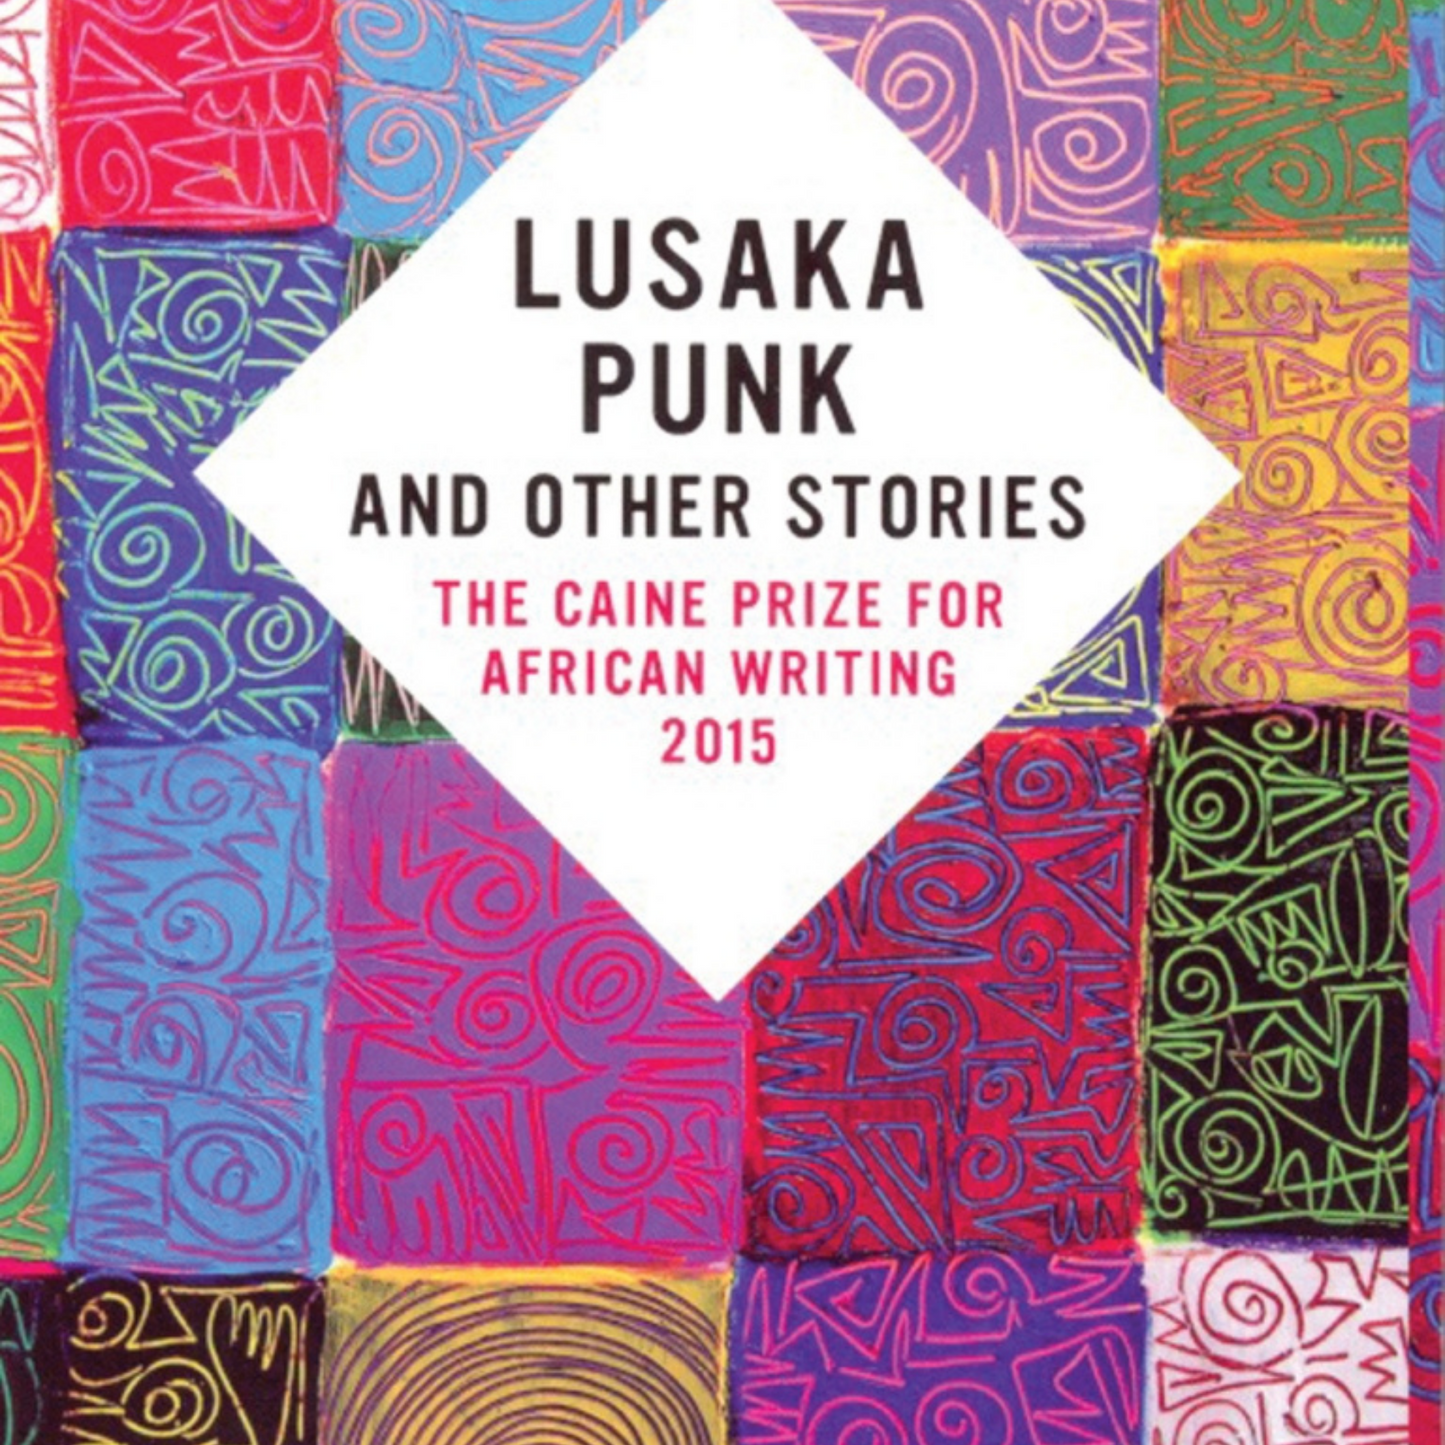 Lusaka Punk And Other Stories